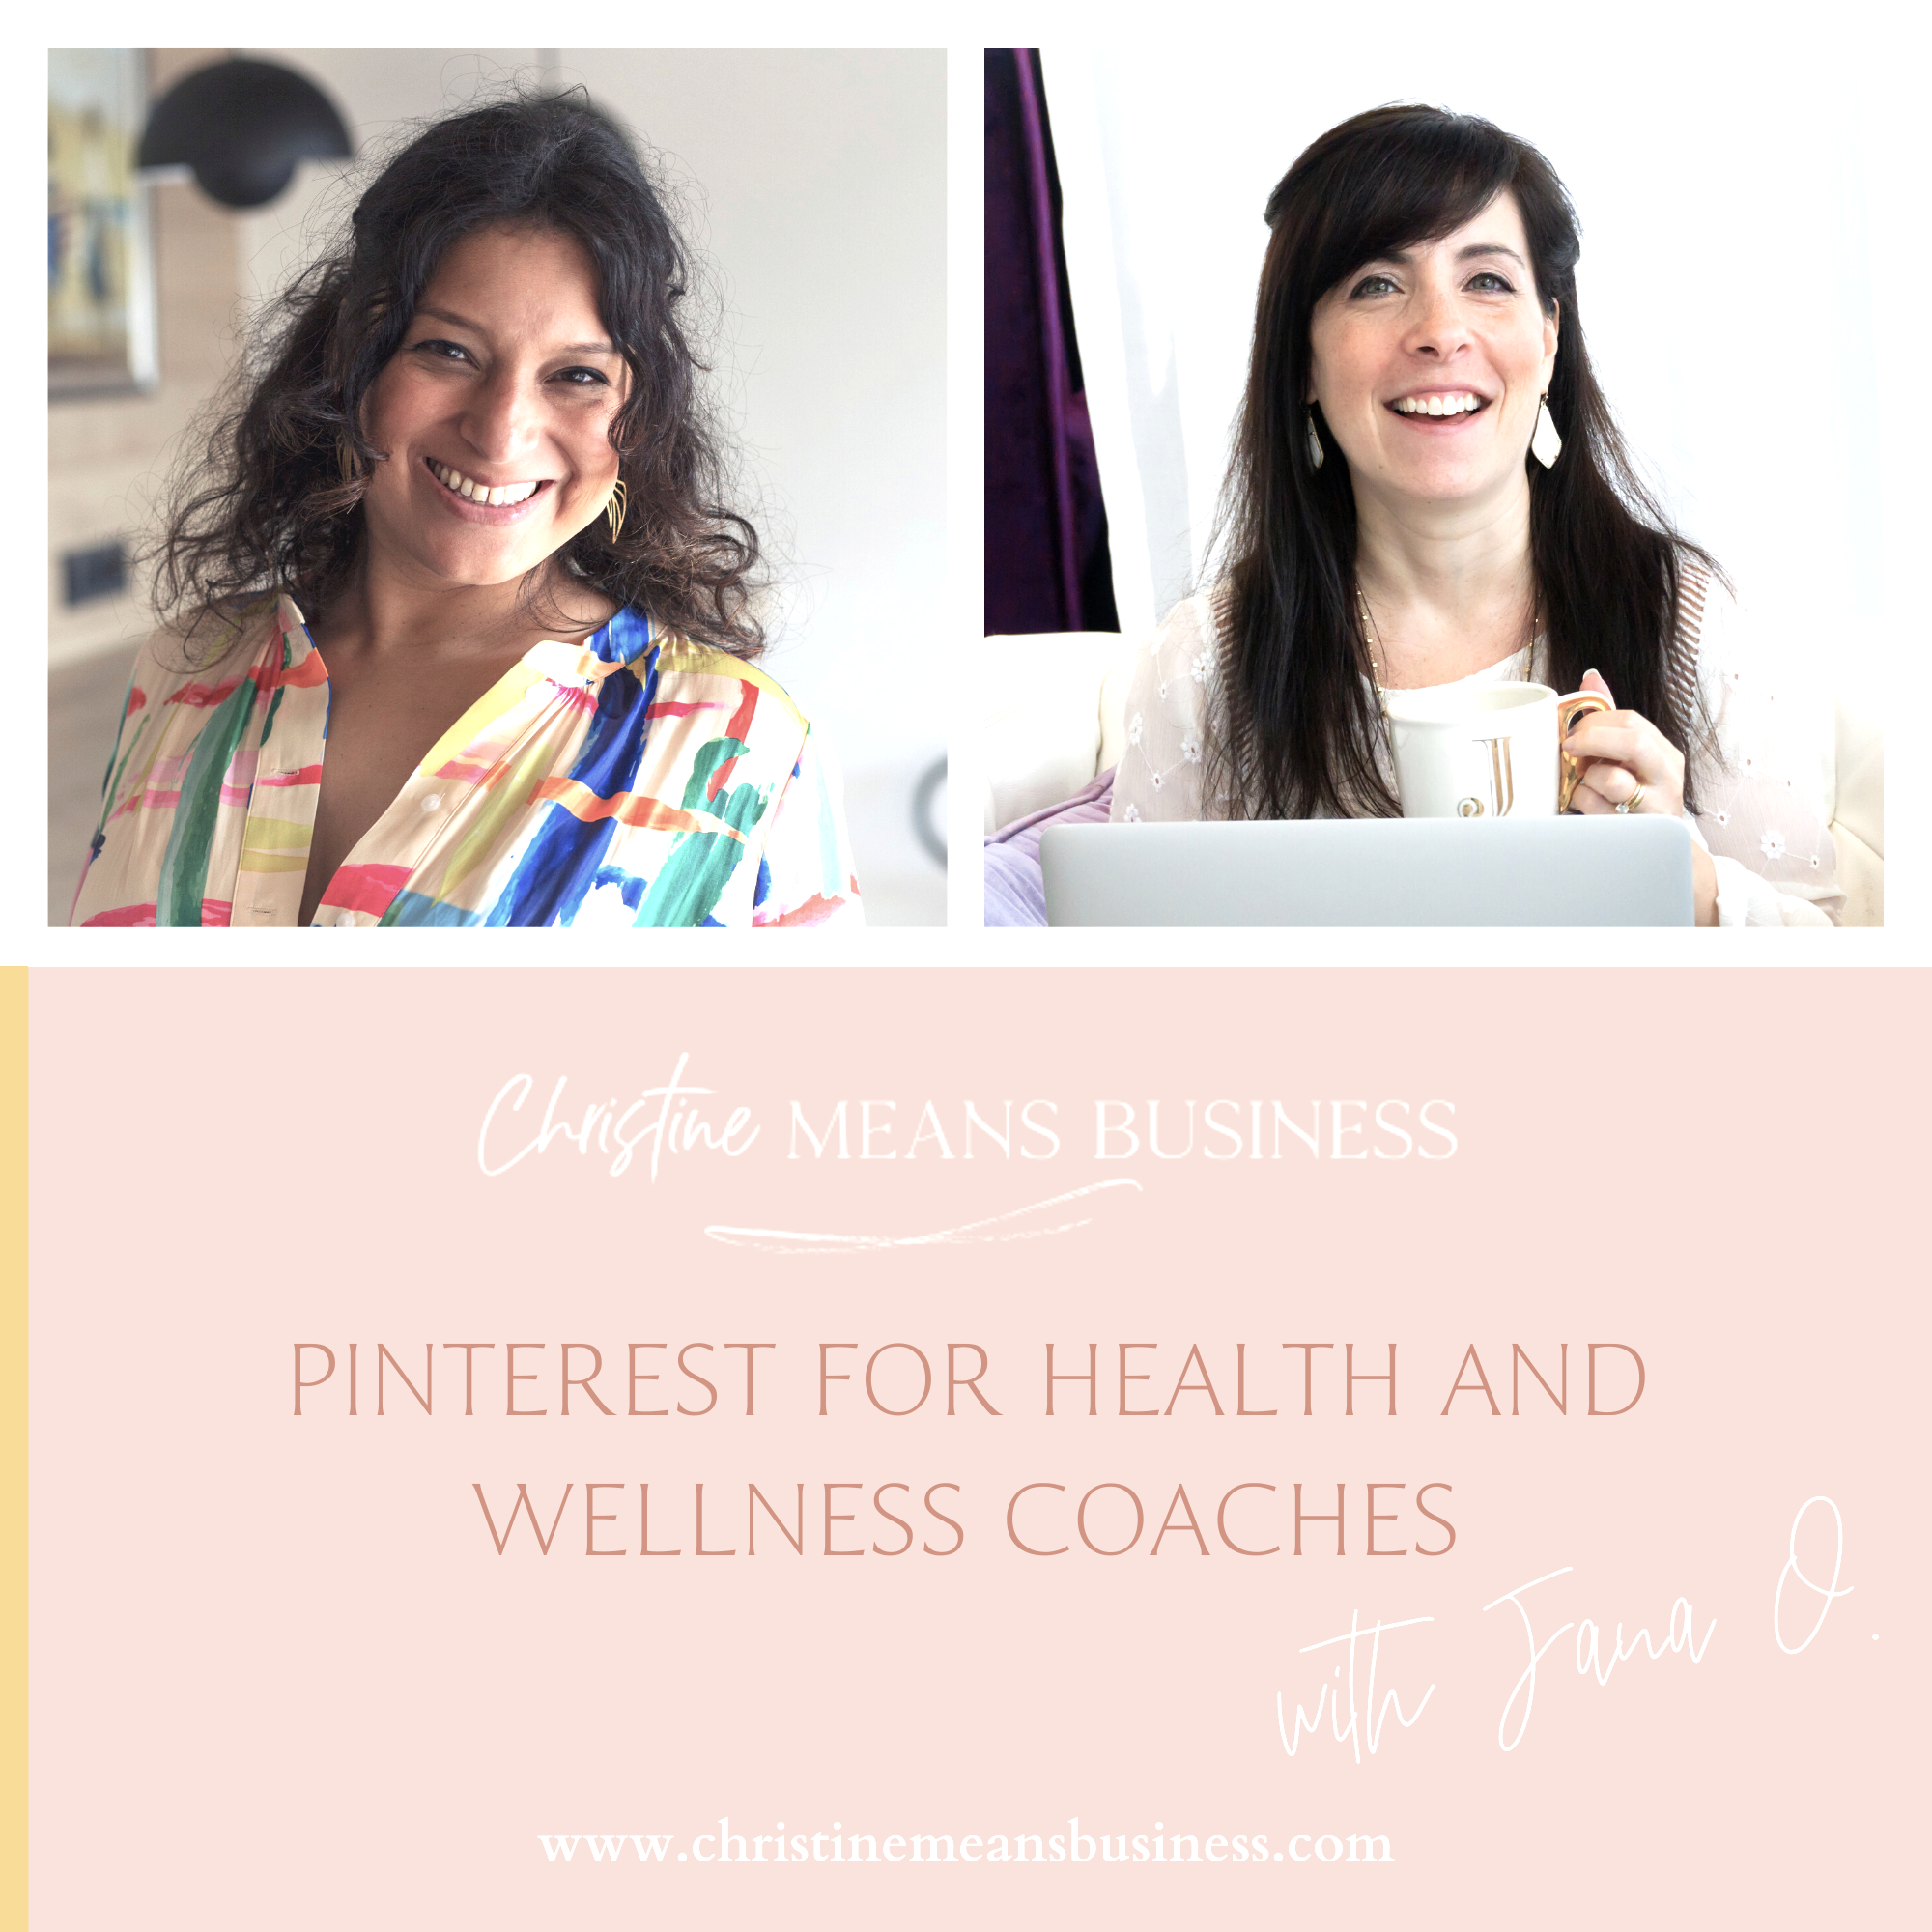 Pinterest for Health and Wellness Coaches episode